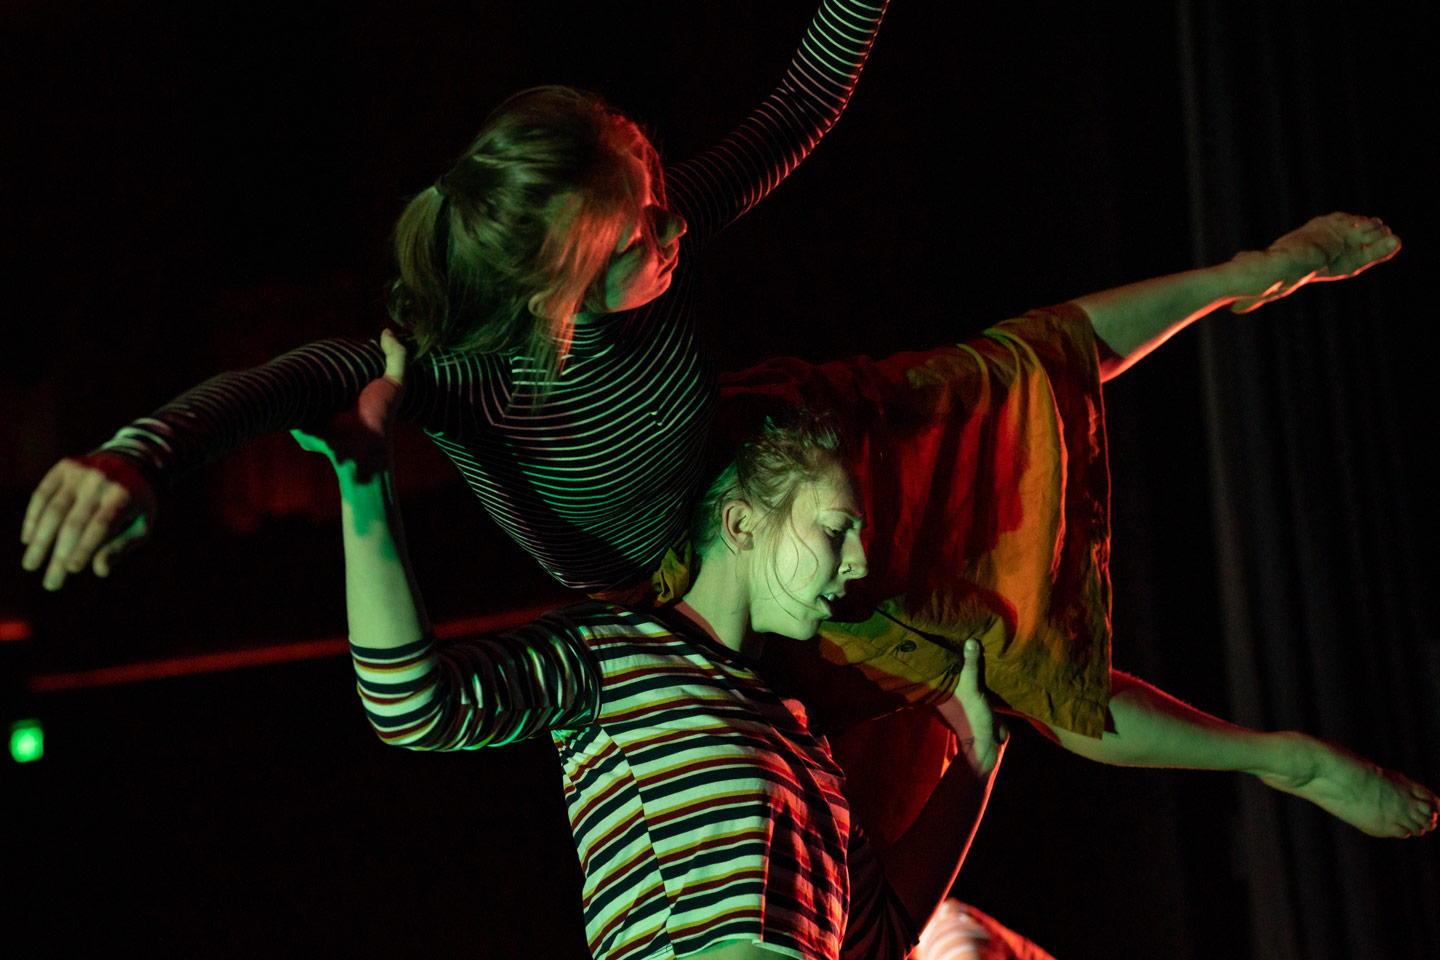 push/FOLD dancers Molly Rea and Briley Jozwiak performing 'Dark Wings' at the Patricia Reser Center for the Arts in Beaverton, Oregon | Photo taken by: Ophélia Martin-Weber